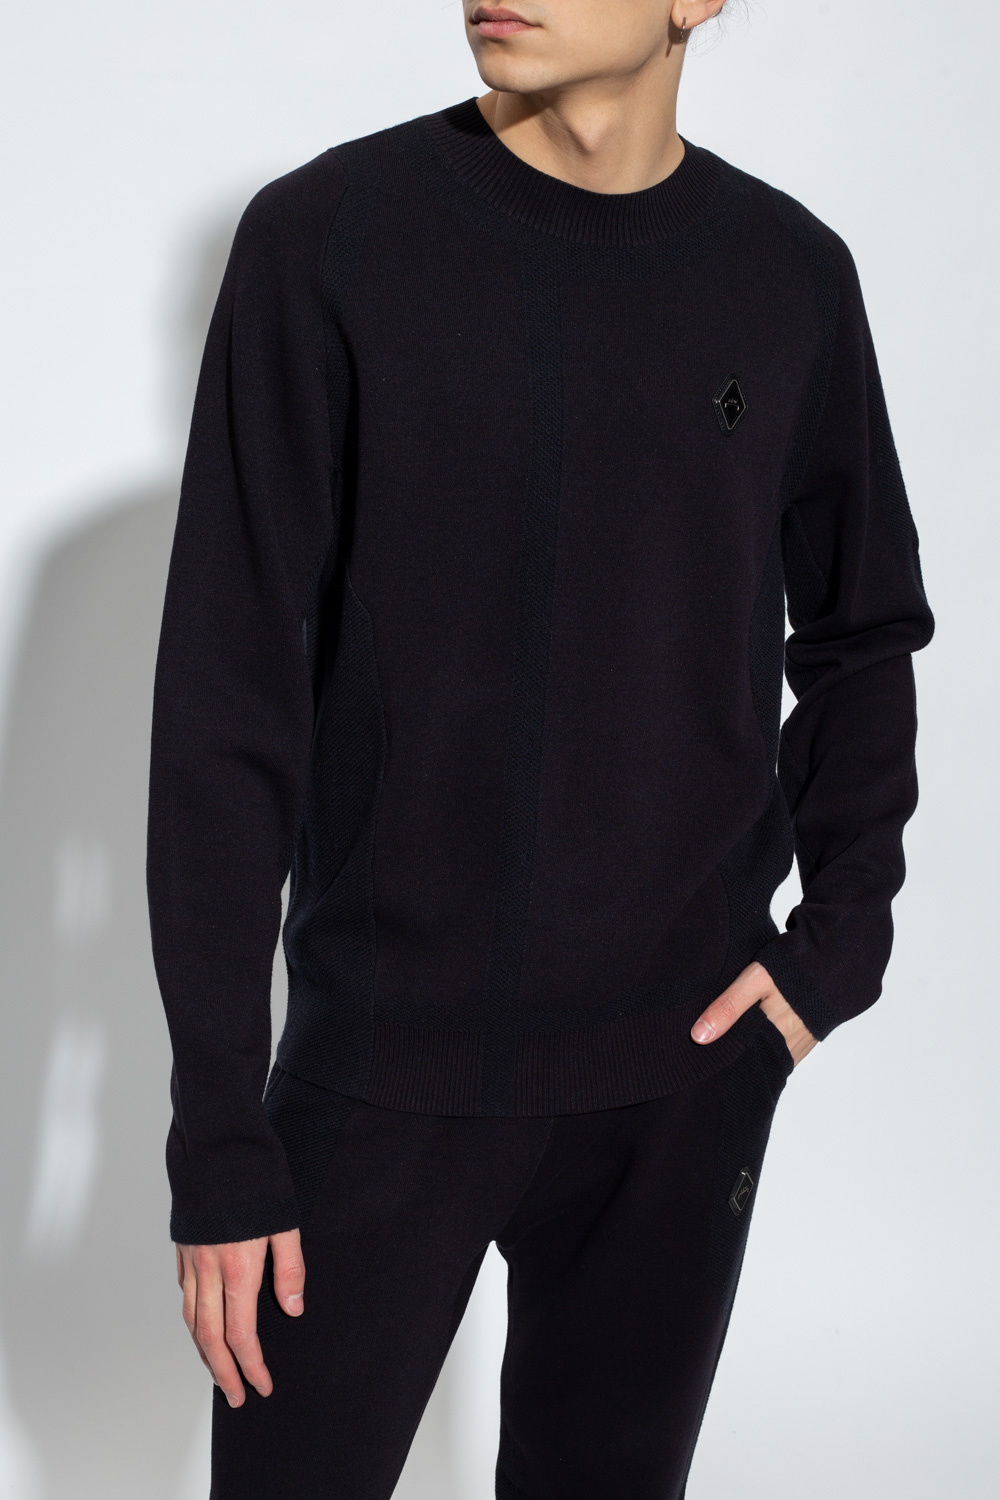 A-COLD-WALL* sweater shoulder with logo